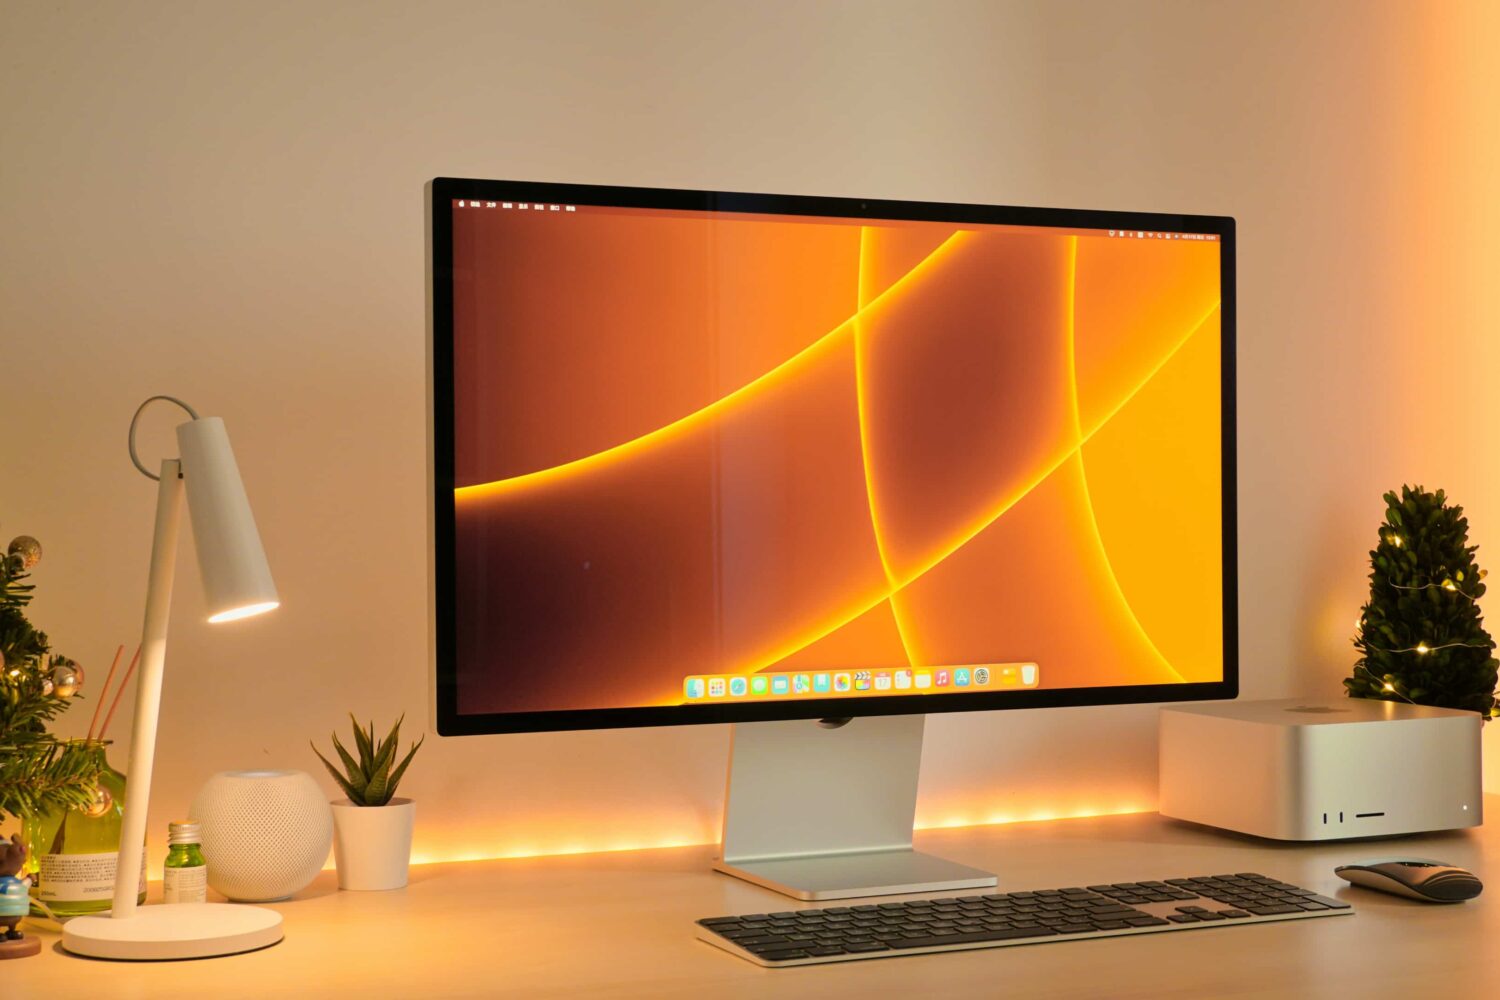 Apple's Studio Display and Mac Studio are featured sitting on a work desk in this lifestyle photograph